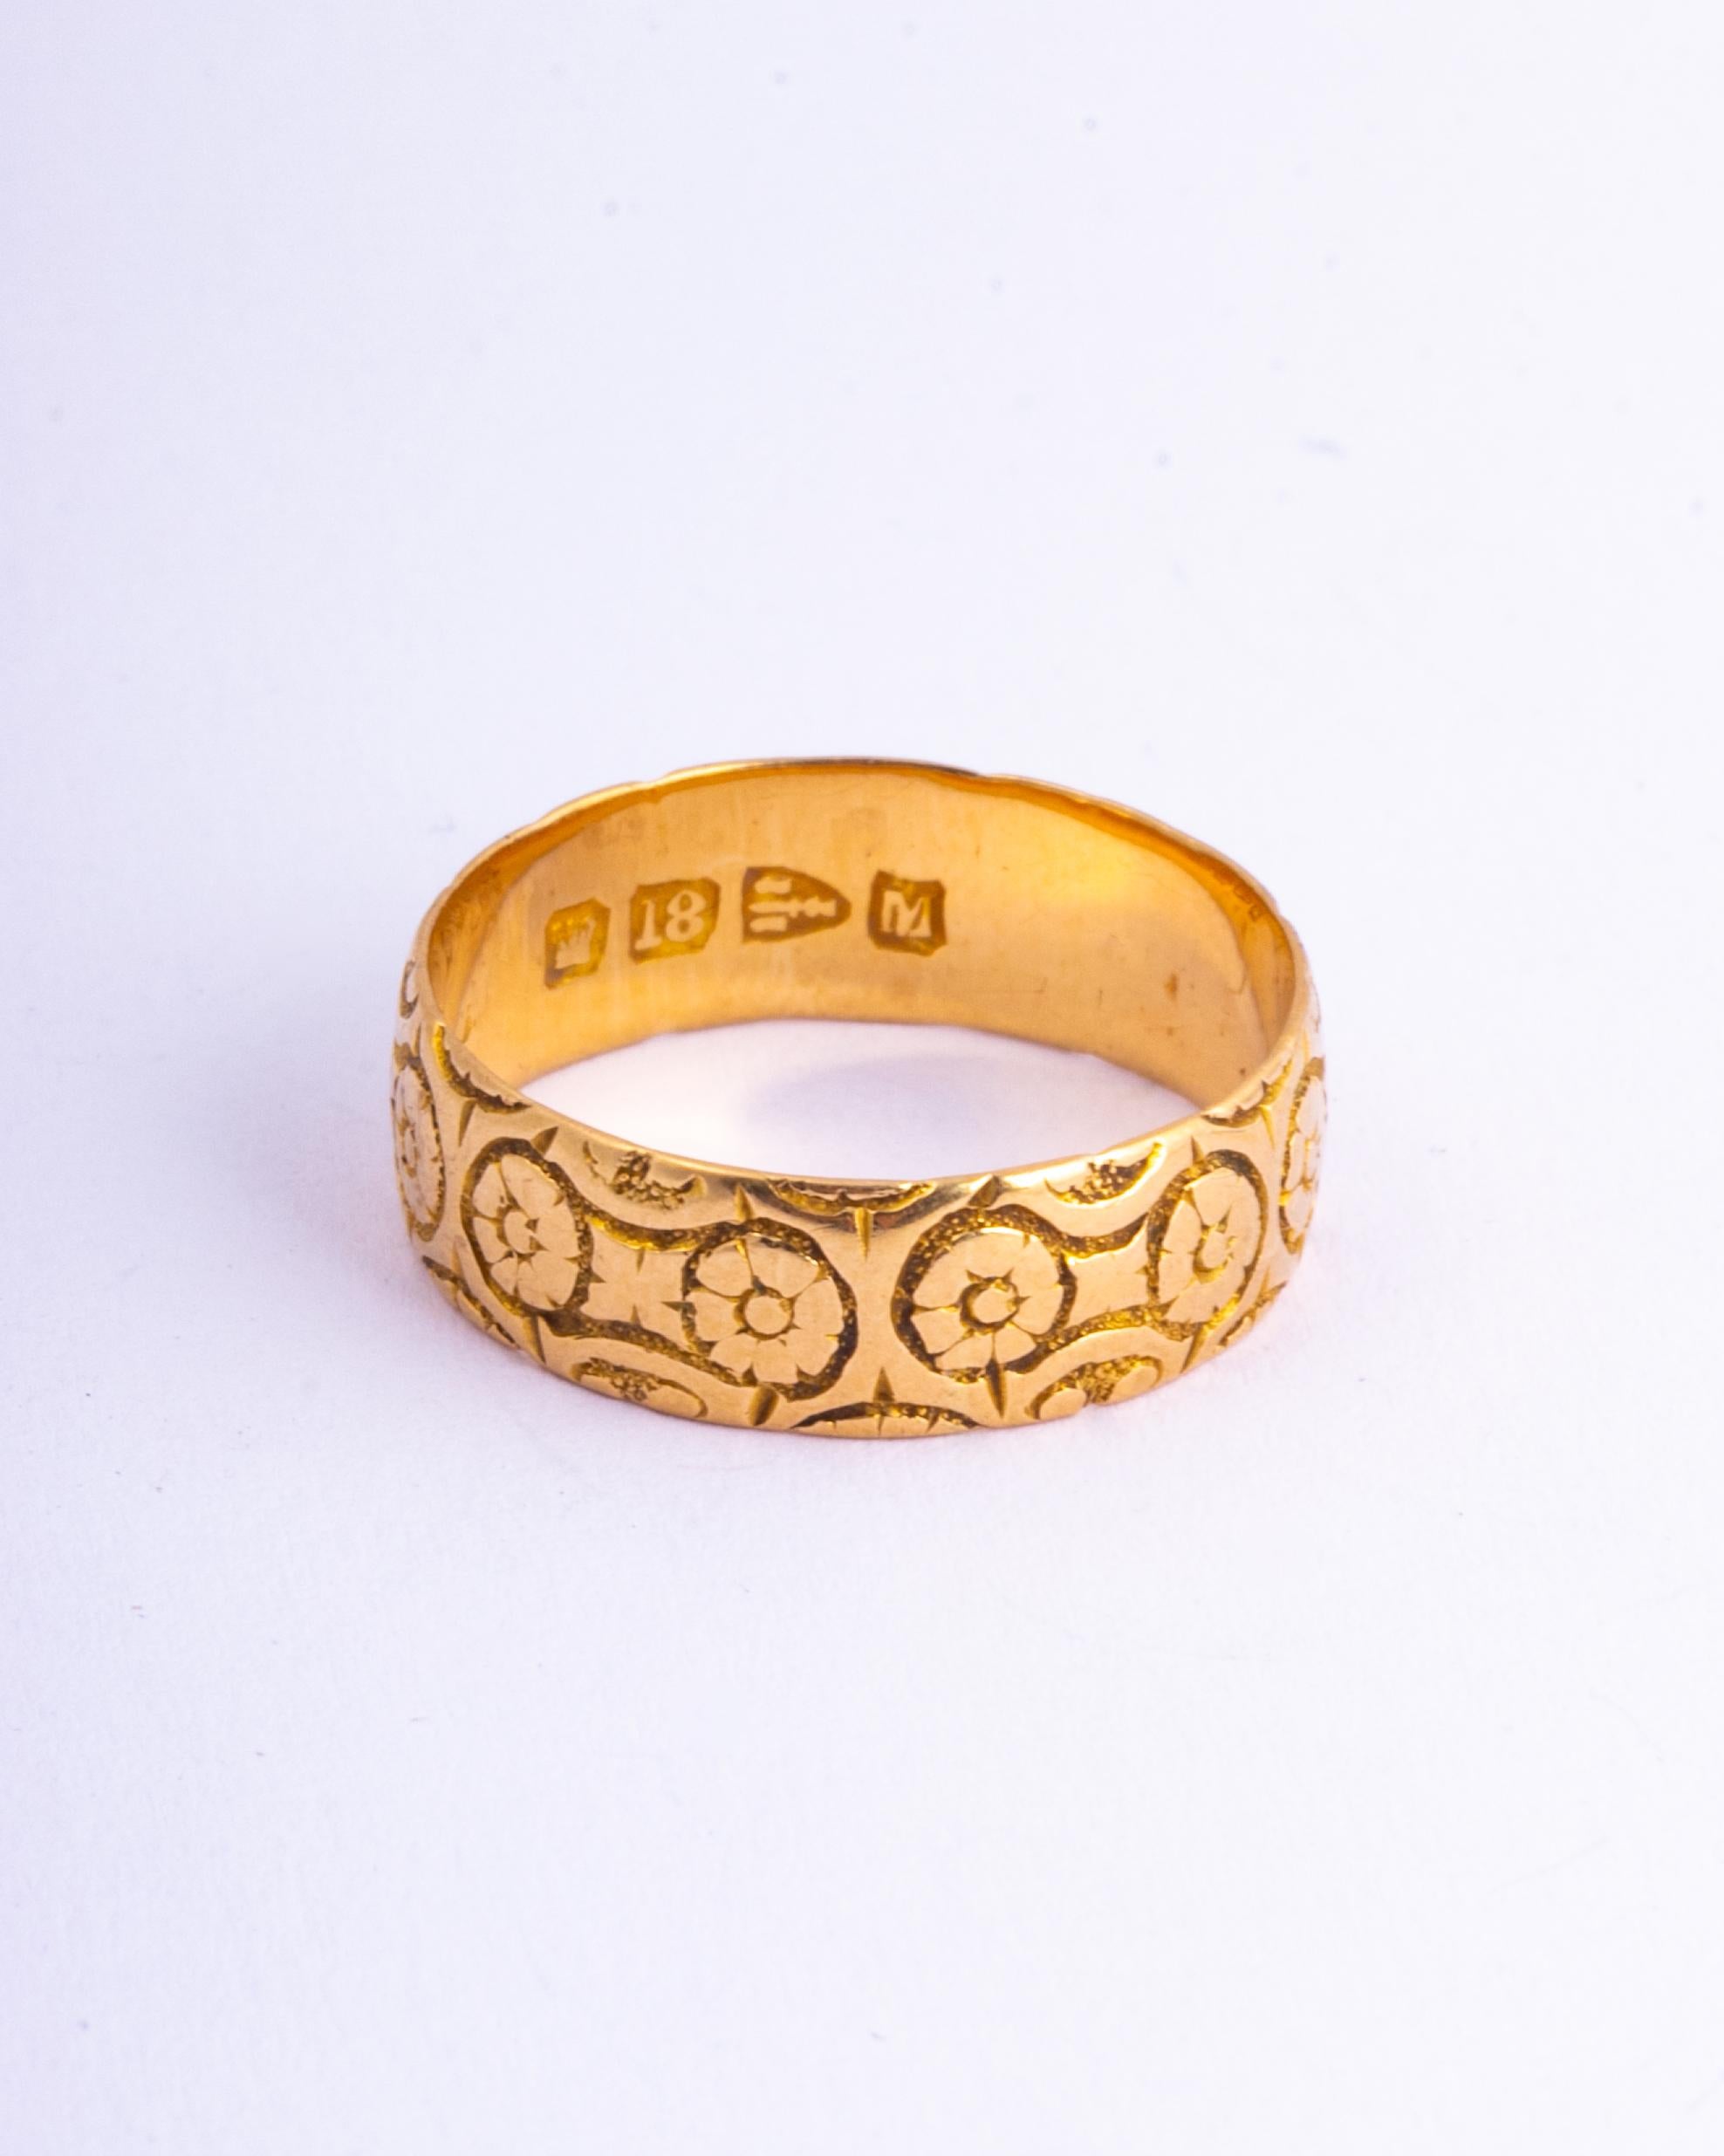 This beautifully decorative 18ct gold band features stunning floral style engraving. Made in Chester, England. 

Ring Size: N 1/4 or 7
Band Width: 6mm

Weight: 3.55g